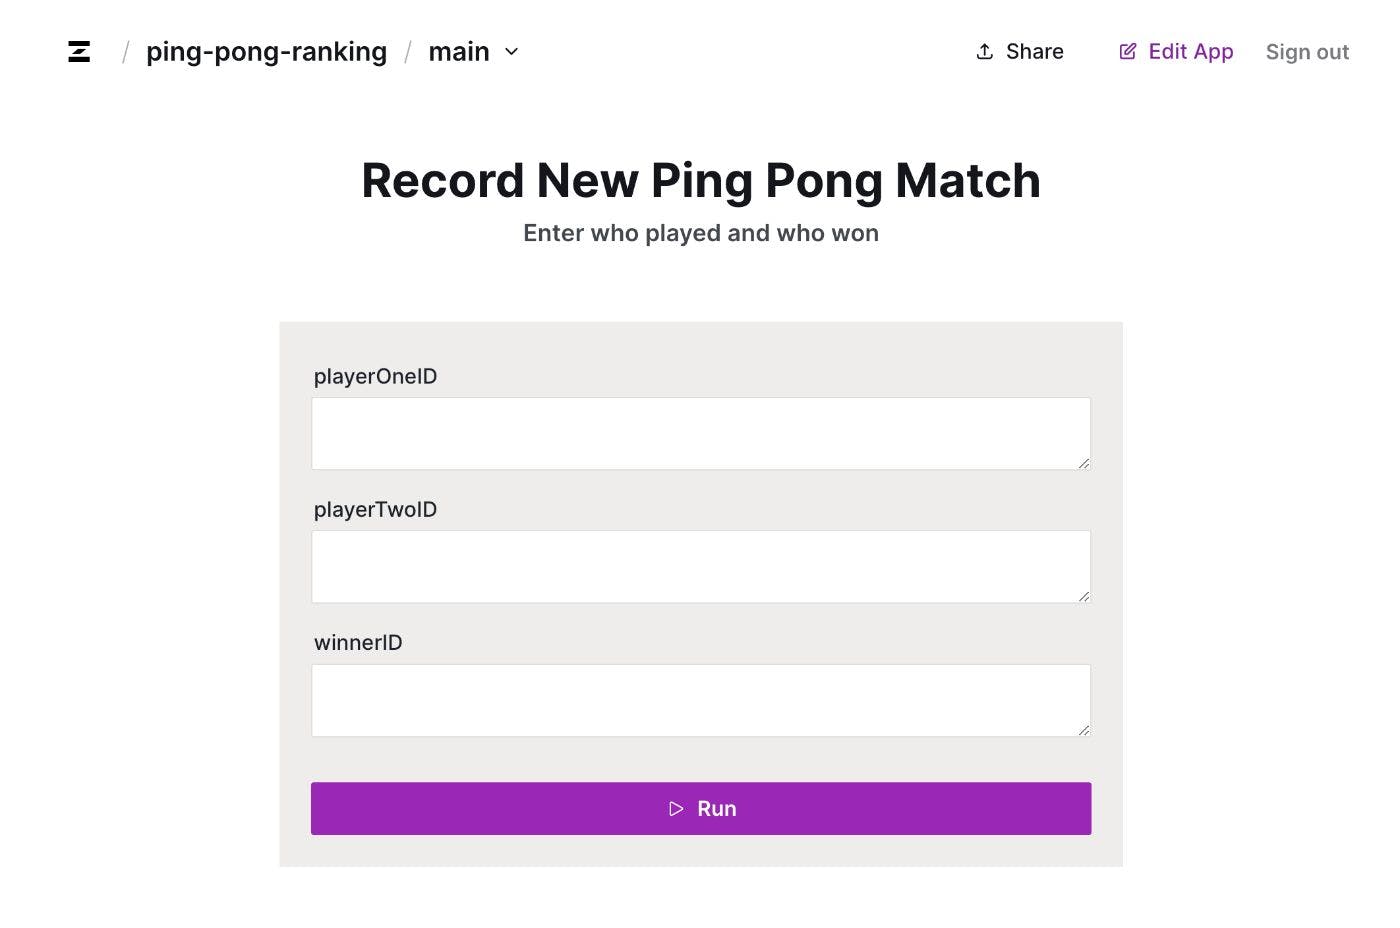 /how-to-build-a-ping-pong-ranking-app-using-zipper-and-typescript-functions feature image